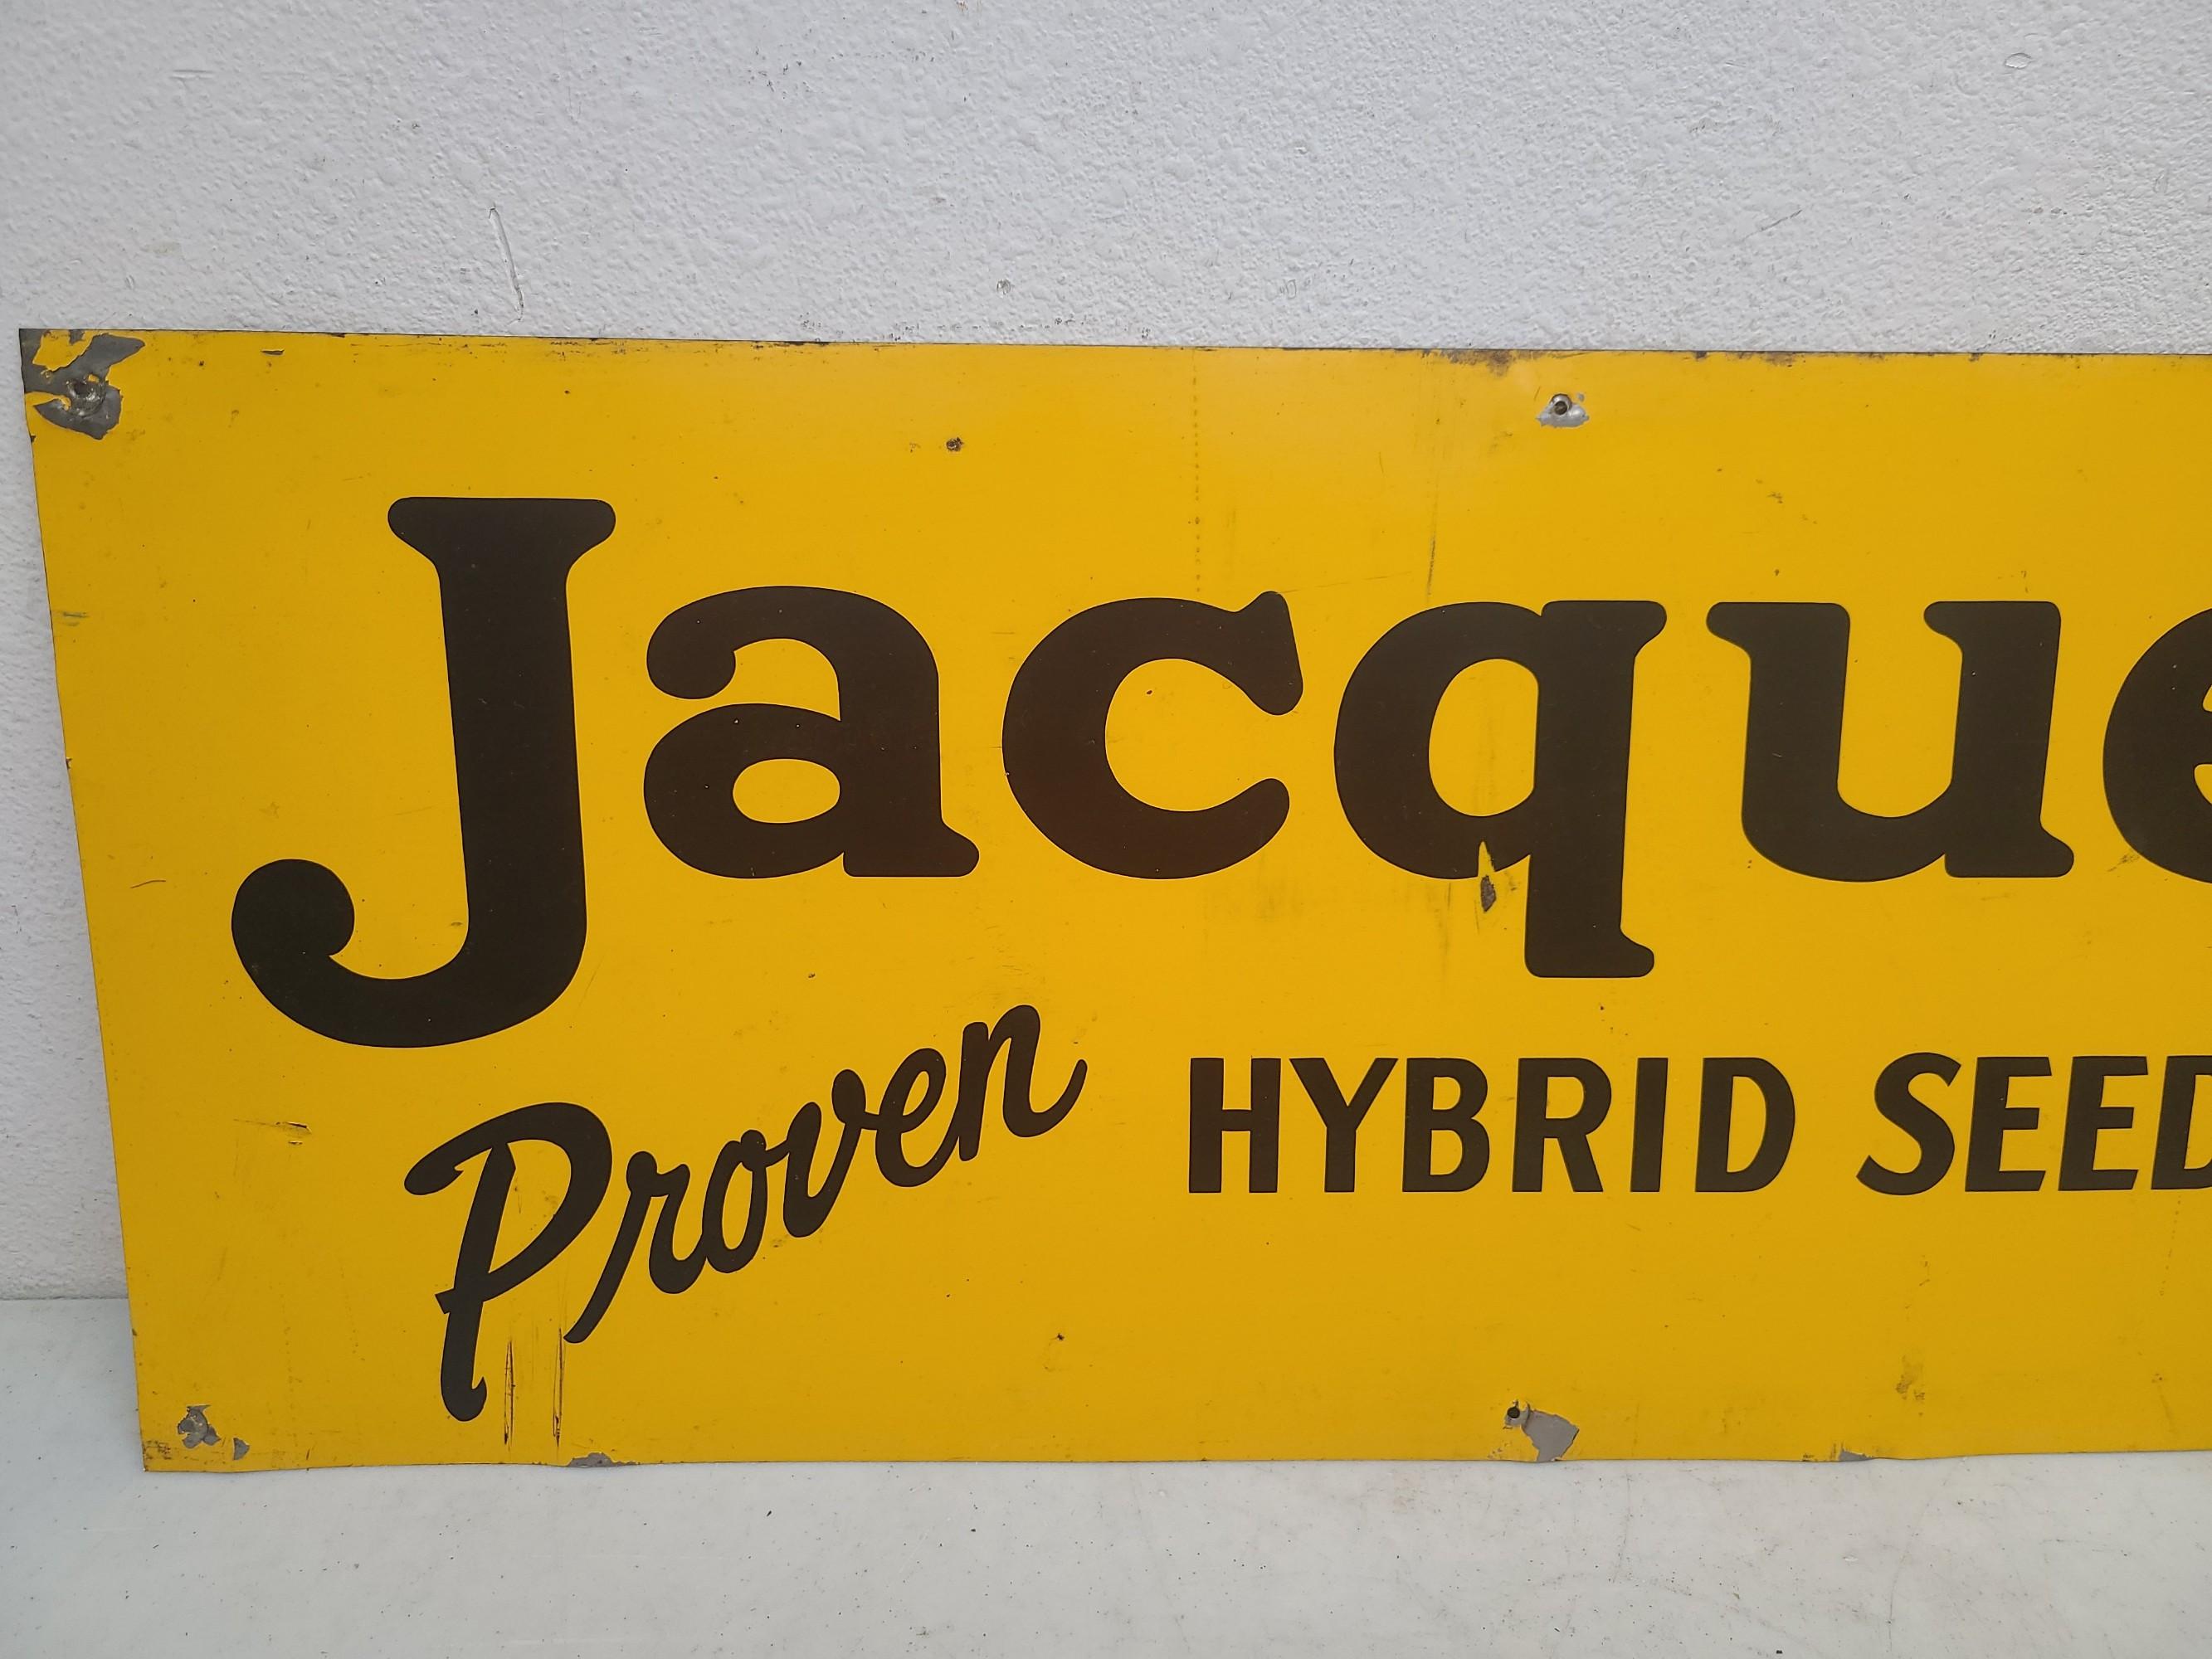 SST, Jacques Seed Corn Sign